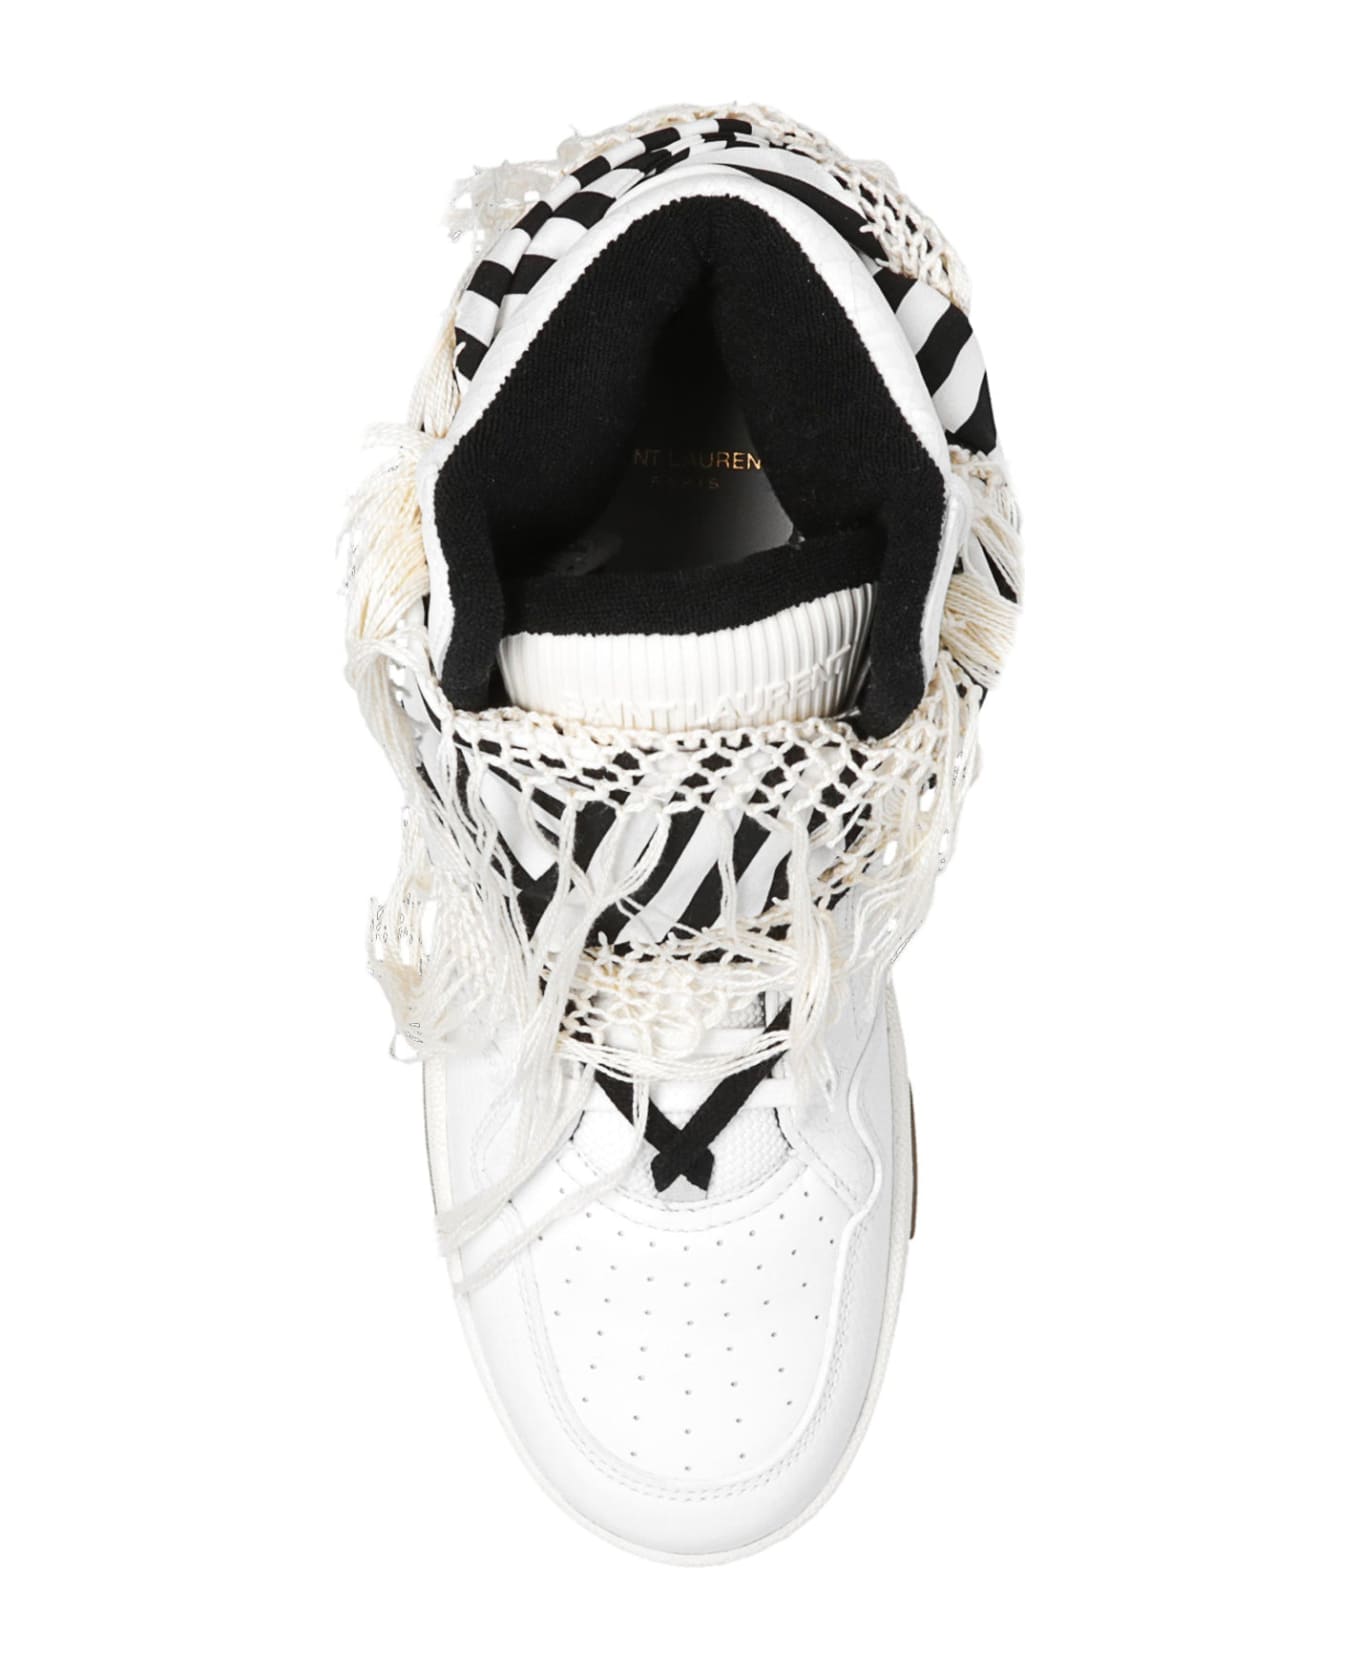 Saint Laurent Smith Leather Sneakers - White スニーカー